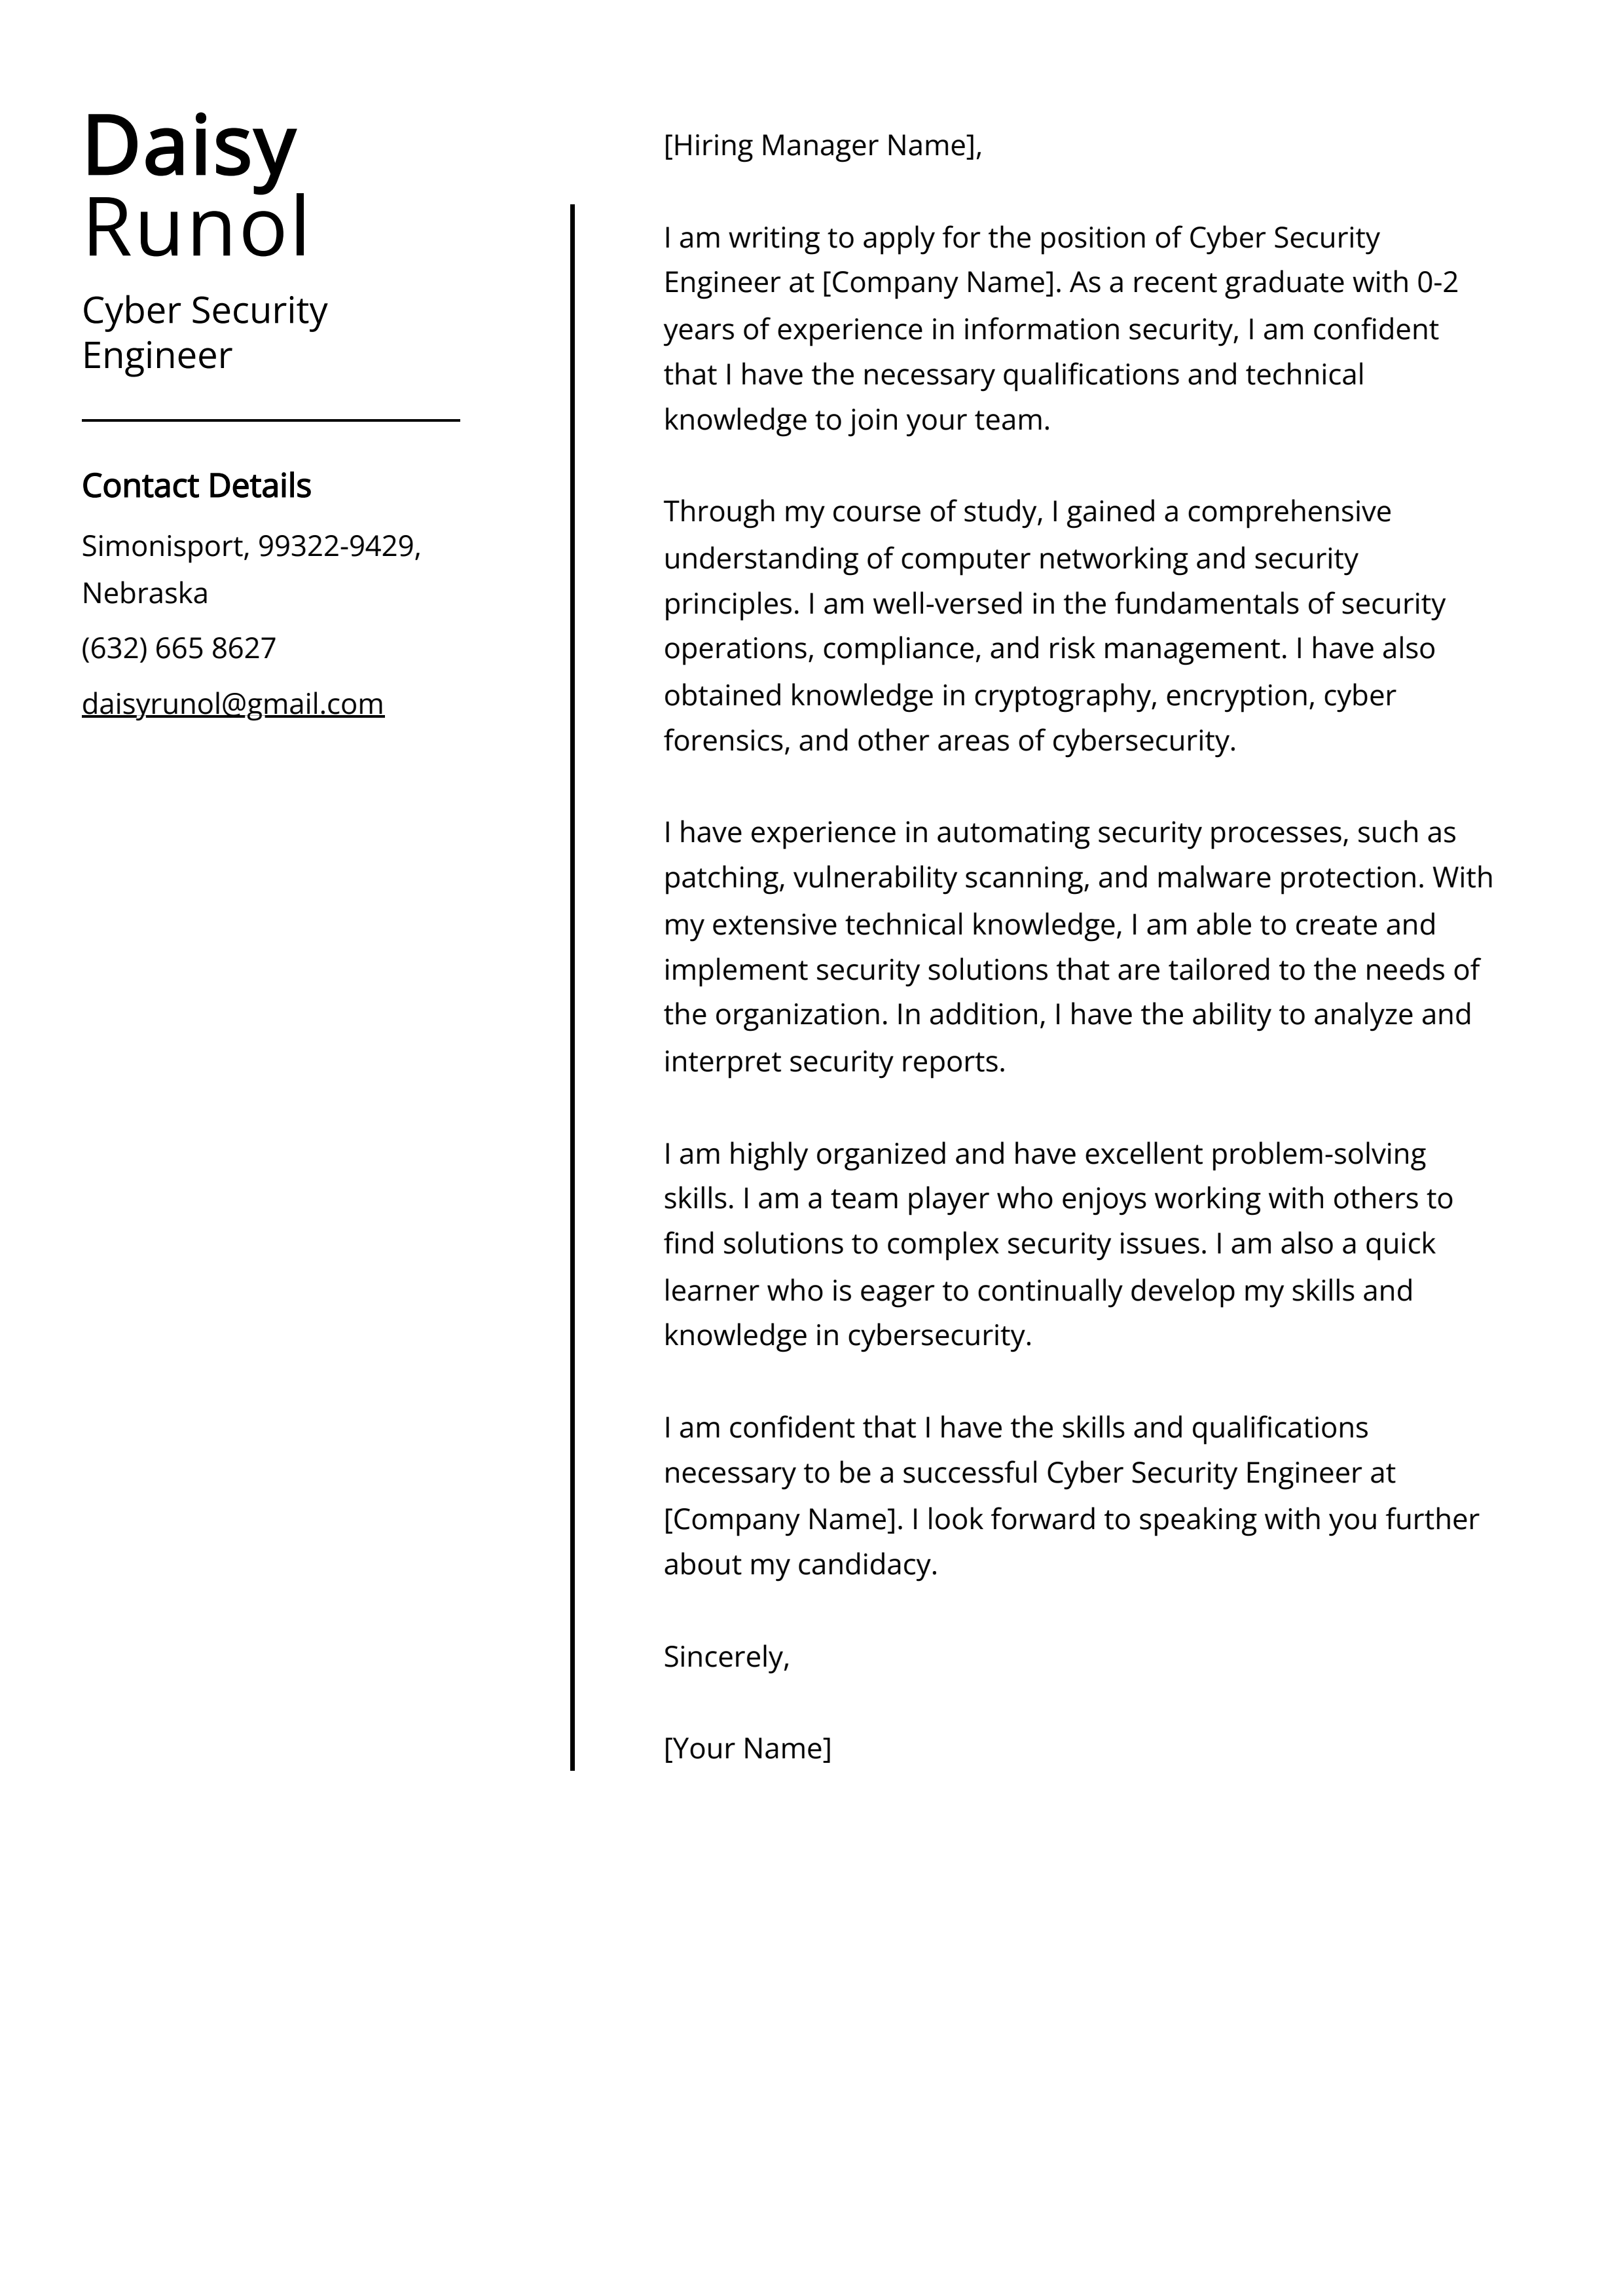 Cyber Security Engineer Cover Letter Example